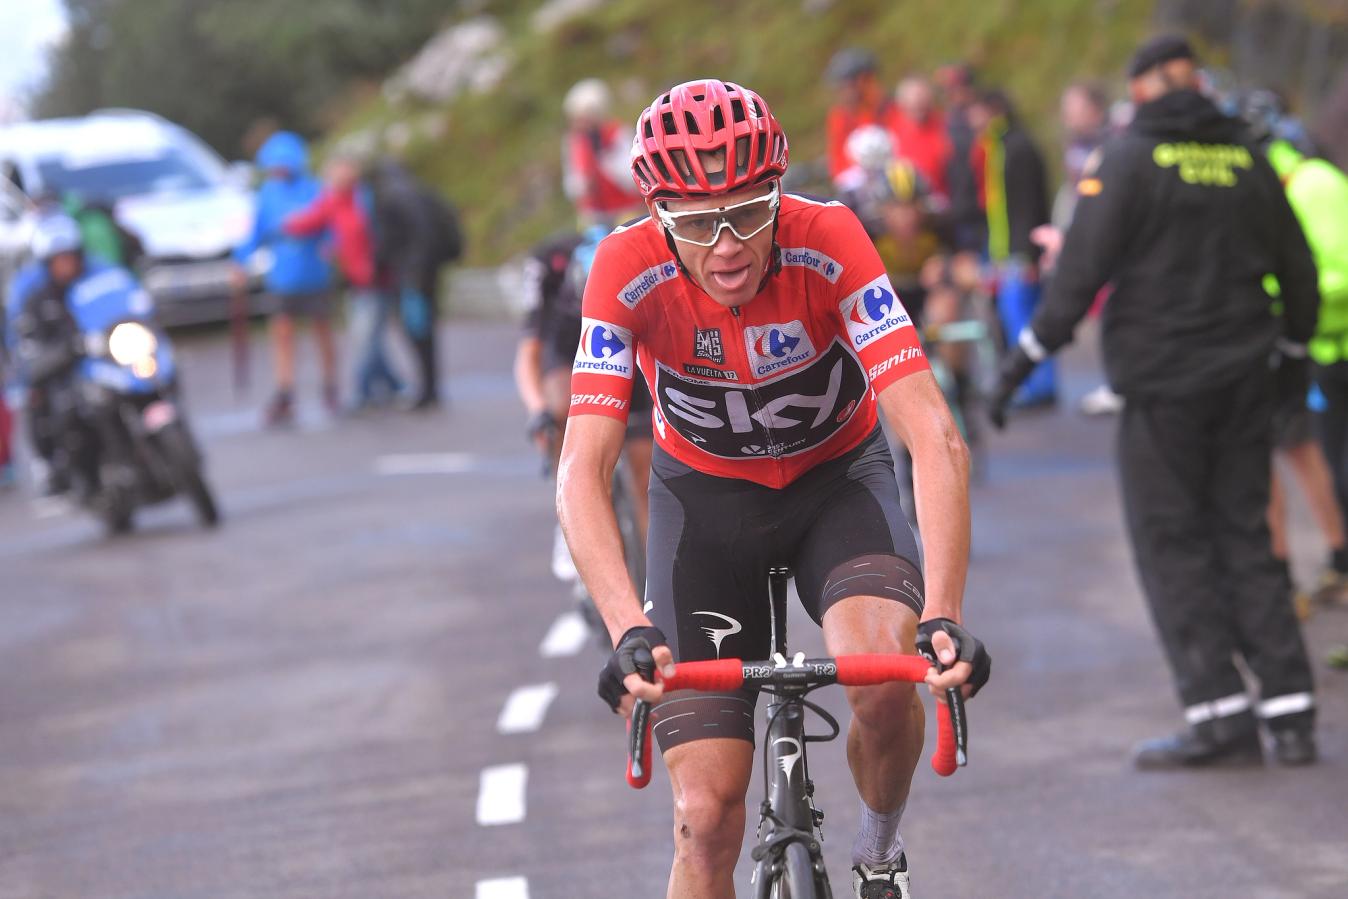 Chris Froome sealed his second Vuelta title on the Angliru in 2017